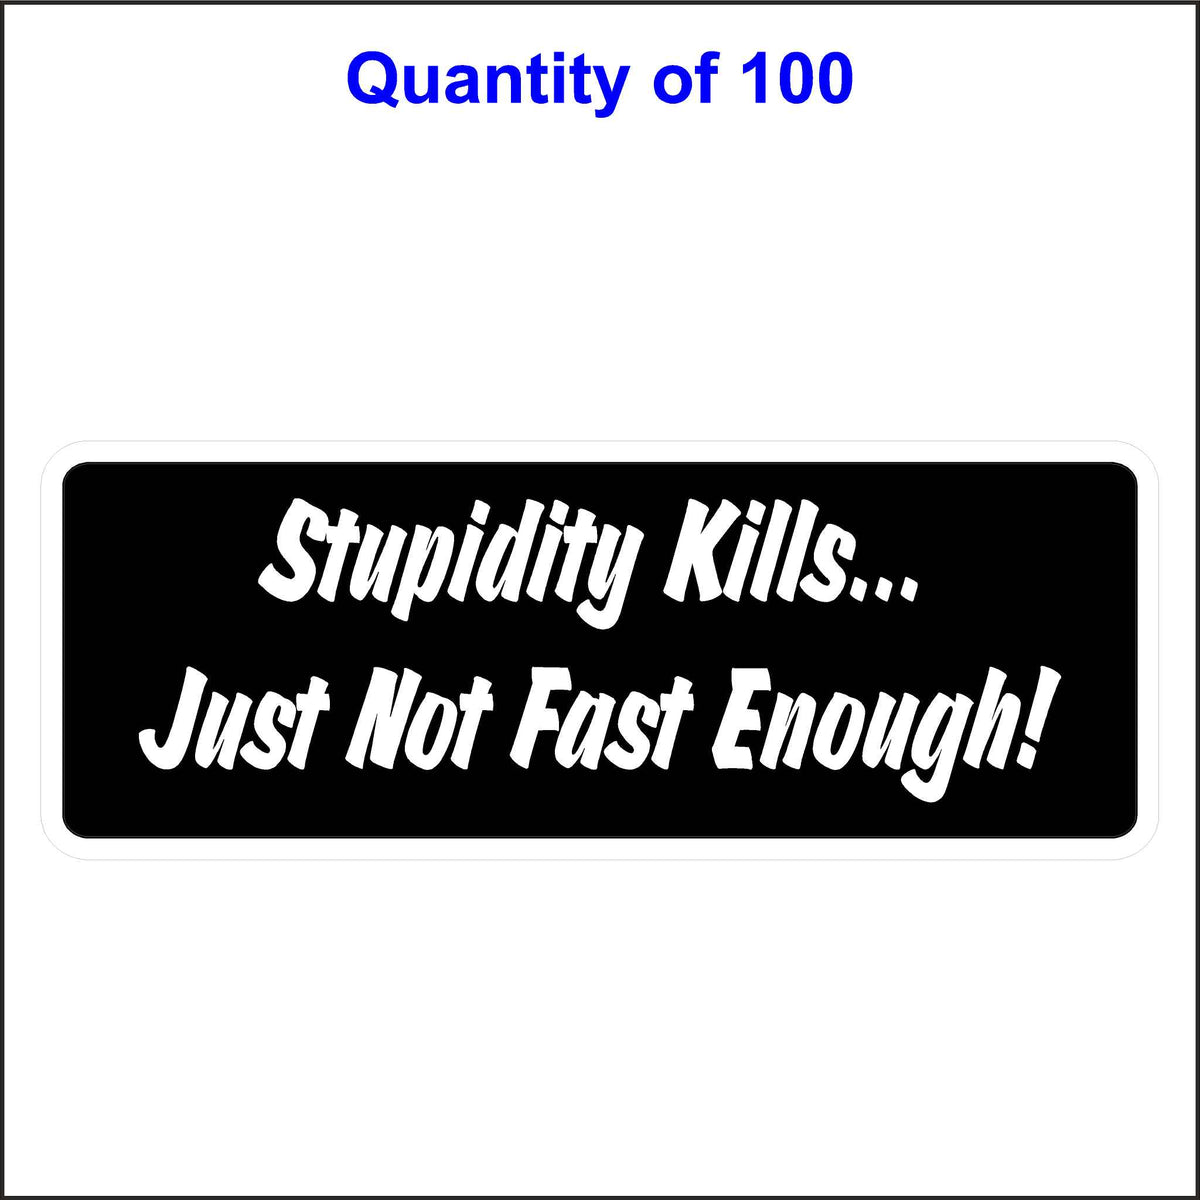 Stupidity Kills Just Not Fast Enough Stickers. 100 Quantity.